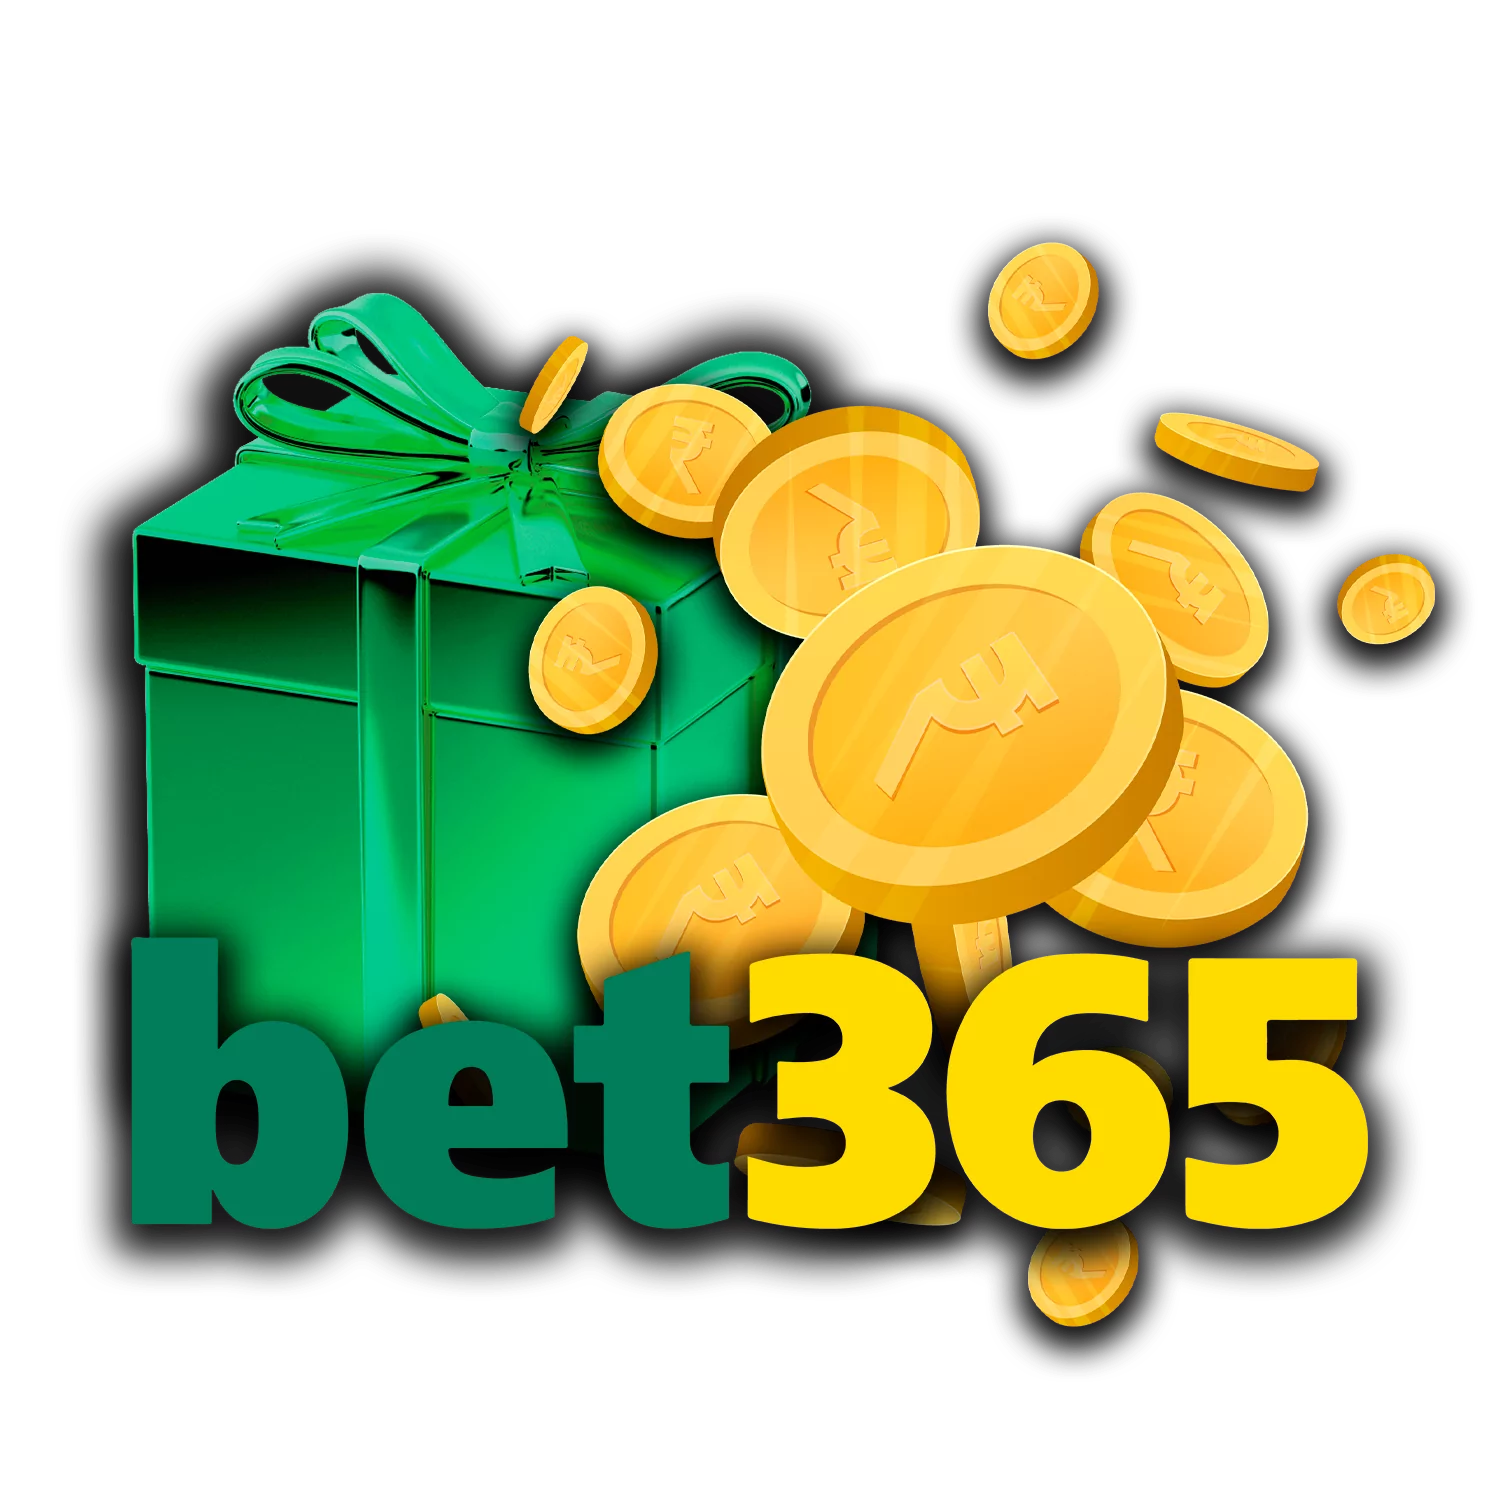 Learn more about bonuses and promotions you can use for betting on sports at Bet365.